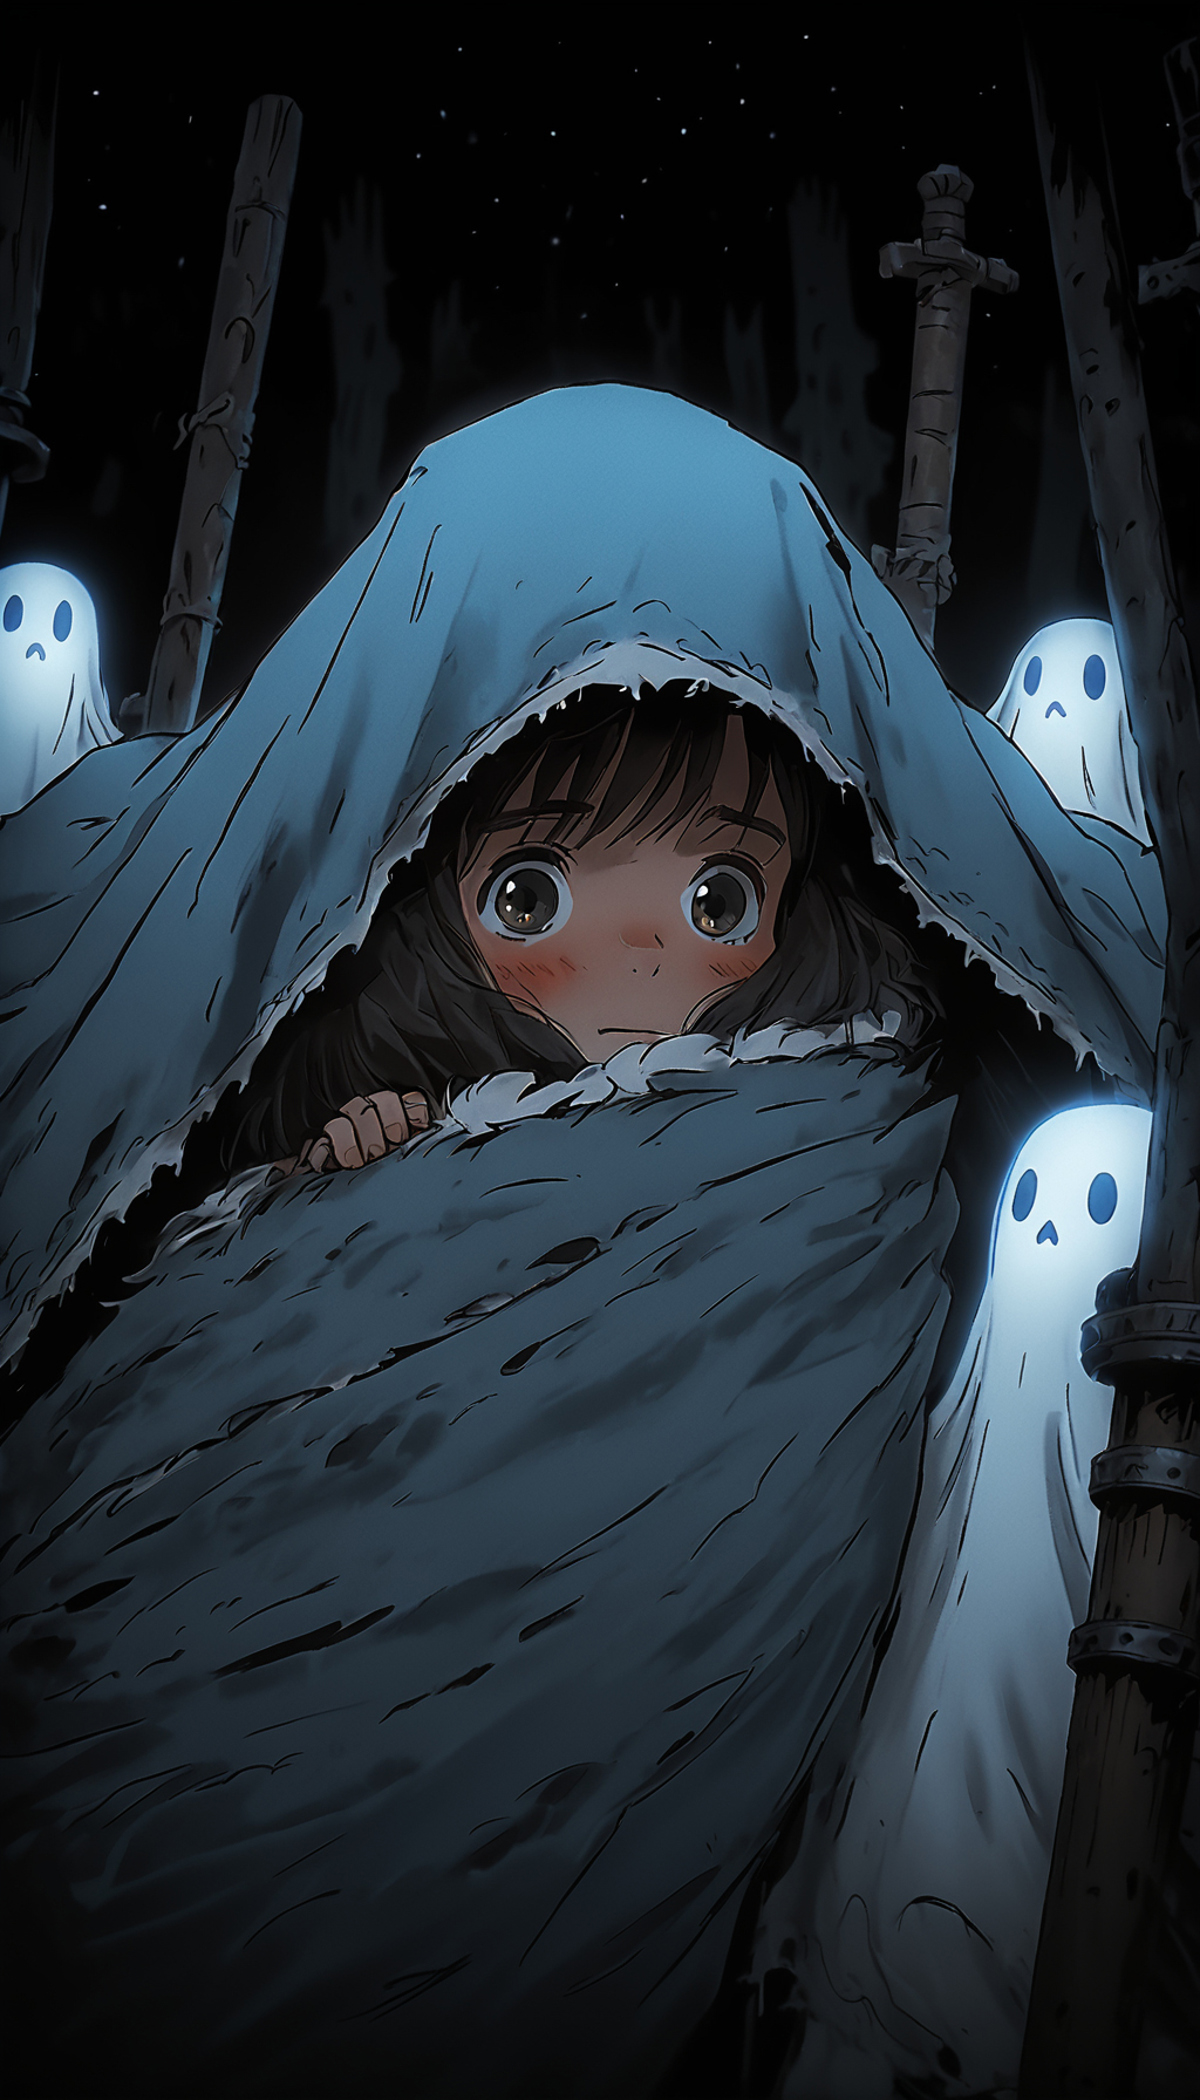 A Girl Hiding Under a Blanket with Ghosts Around Her